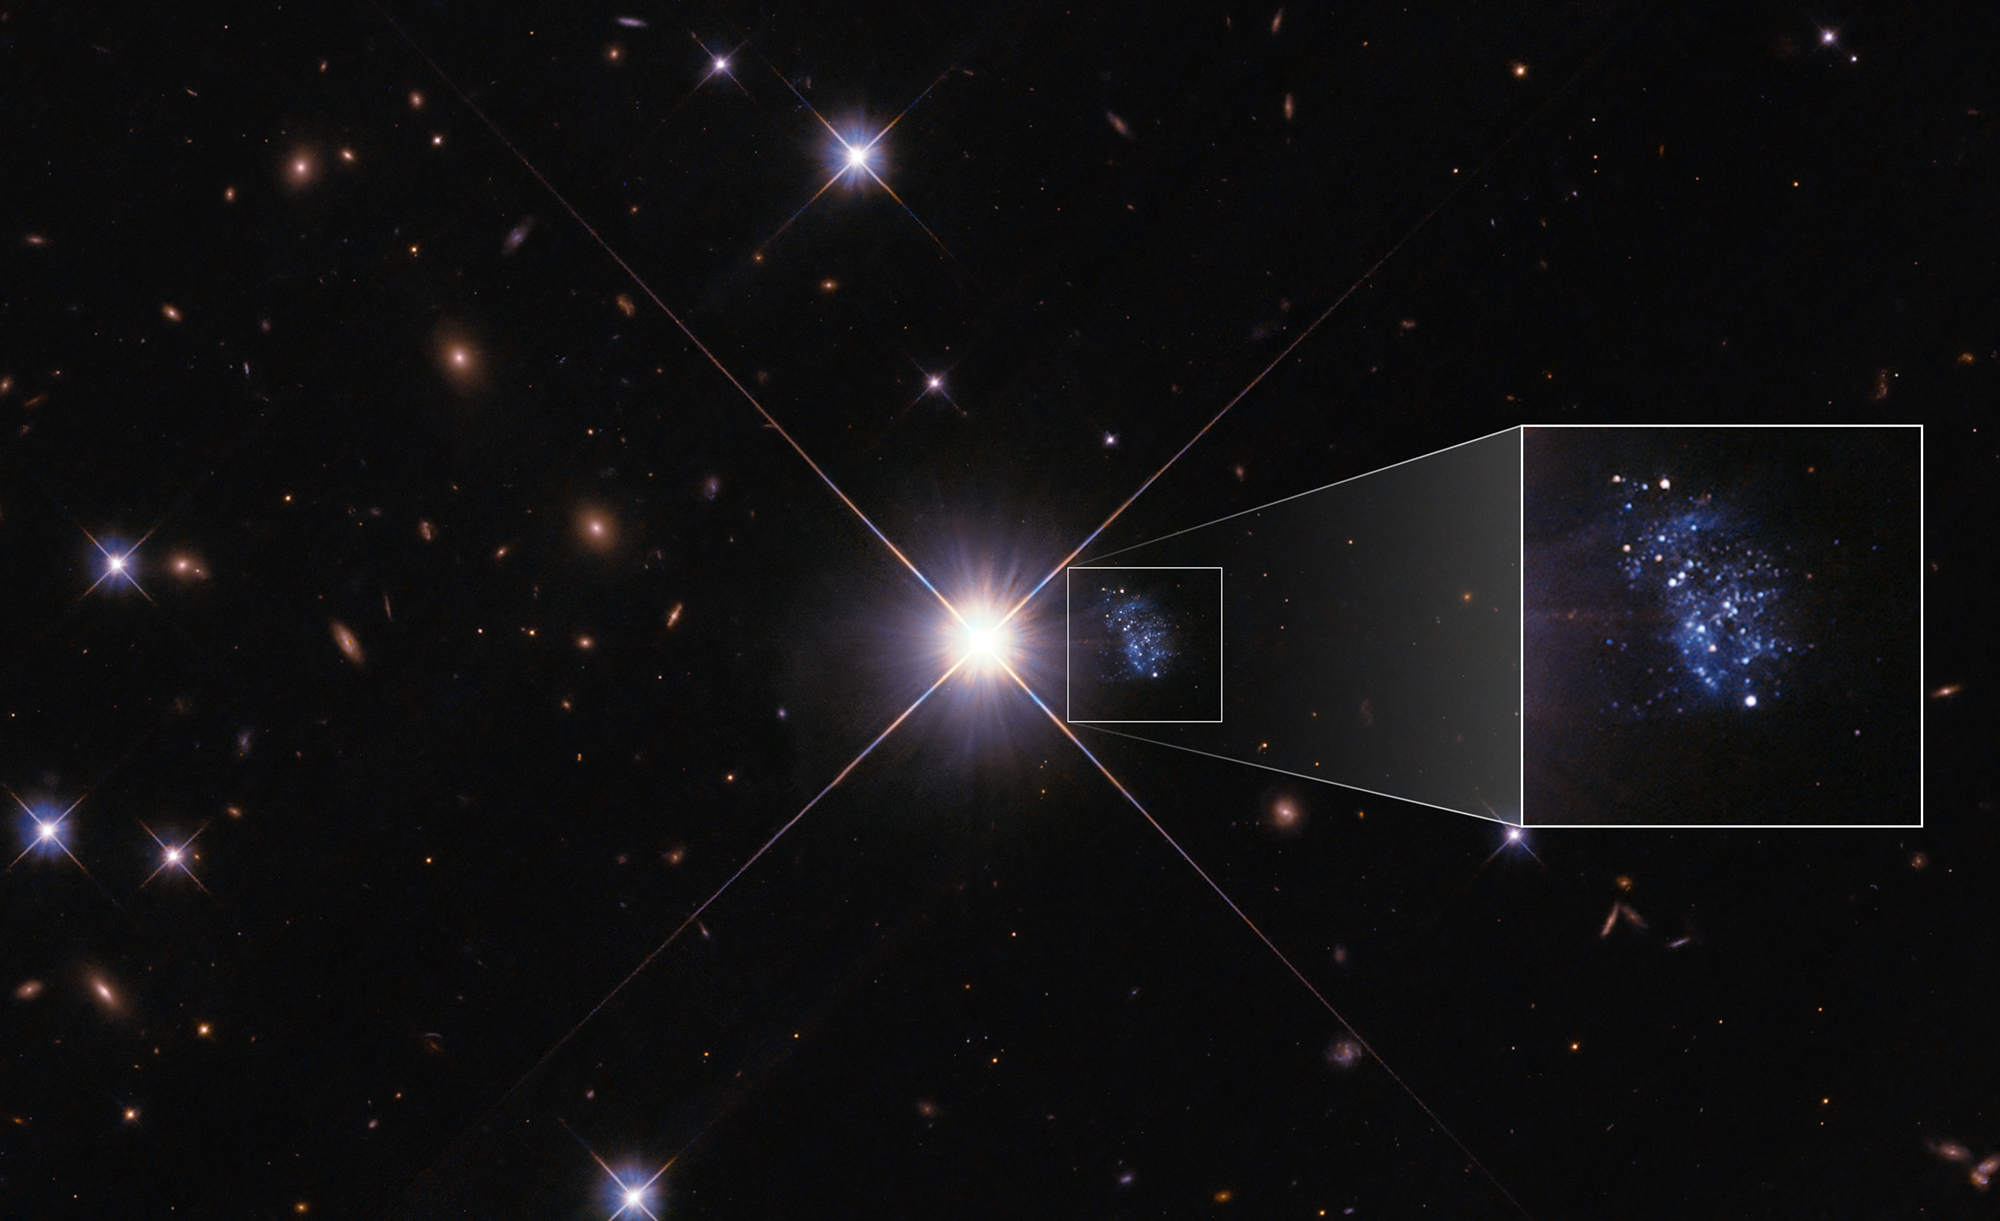 Black background peppered with blue-white stars and distant rusty-orange-red galaxies. Image Center: bright star with gaseous, blue, elongated, amorphous mass peppered with white stars just to the right. A box expands the for detailed view.